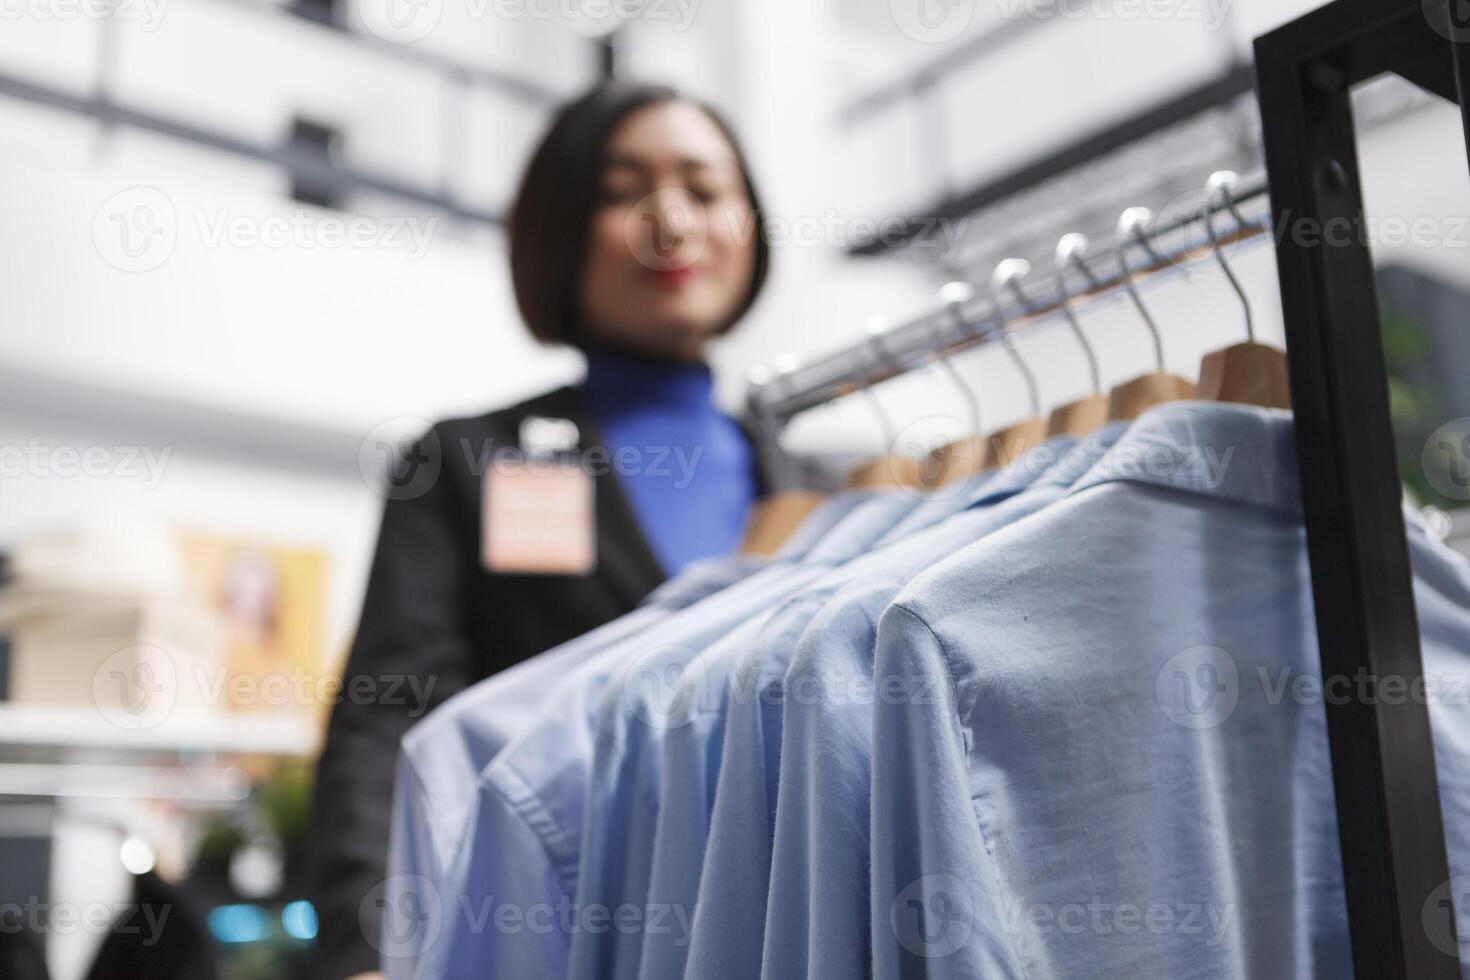 Formal shirts hanging on display rack while asian woman assistant working in clothing store selective focus. Menswear garment on hangers in shopping mall boutique closeup photo